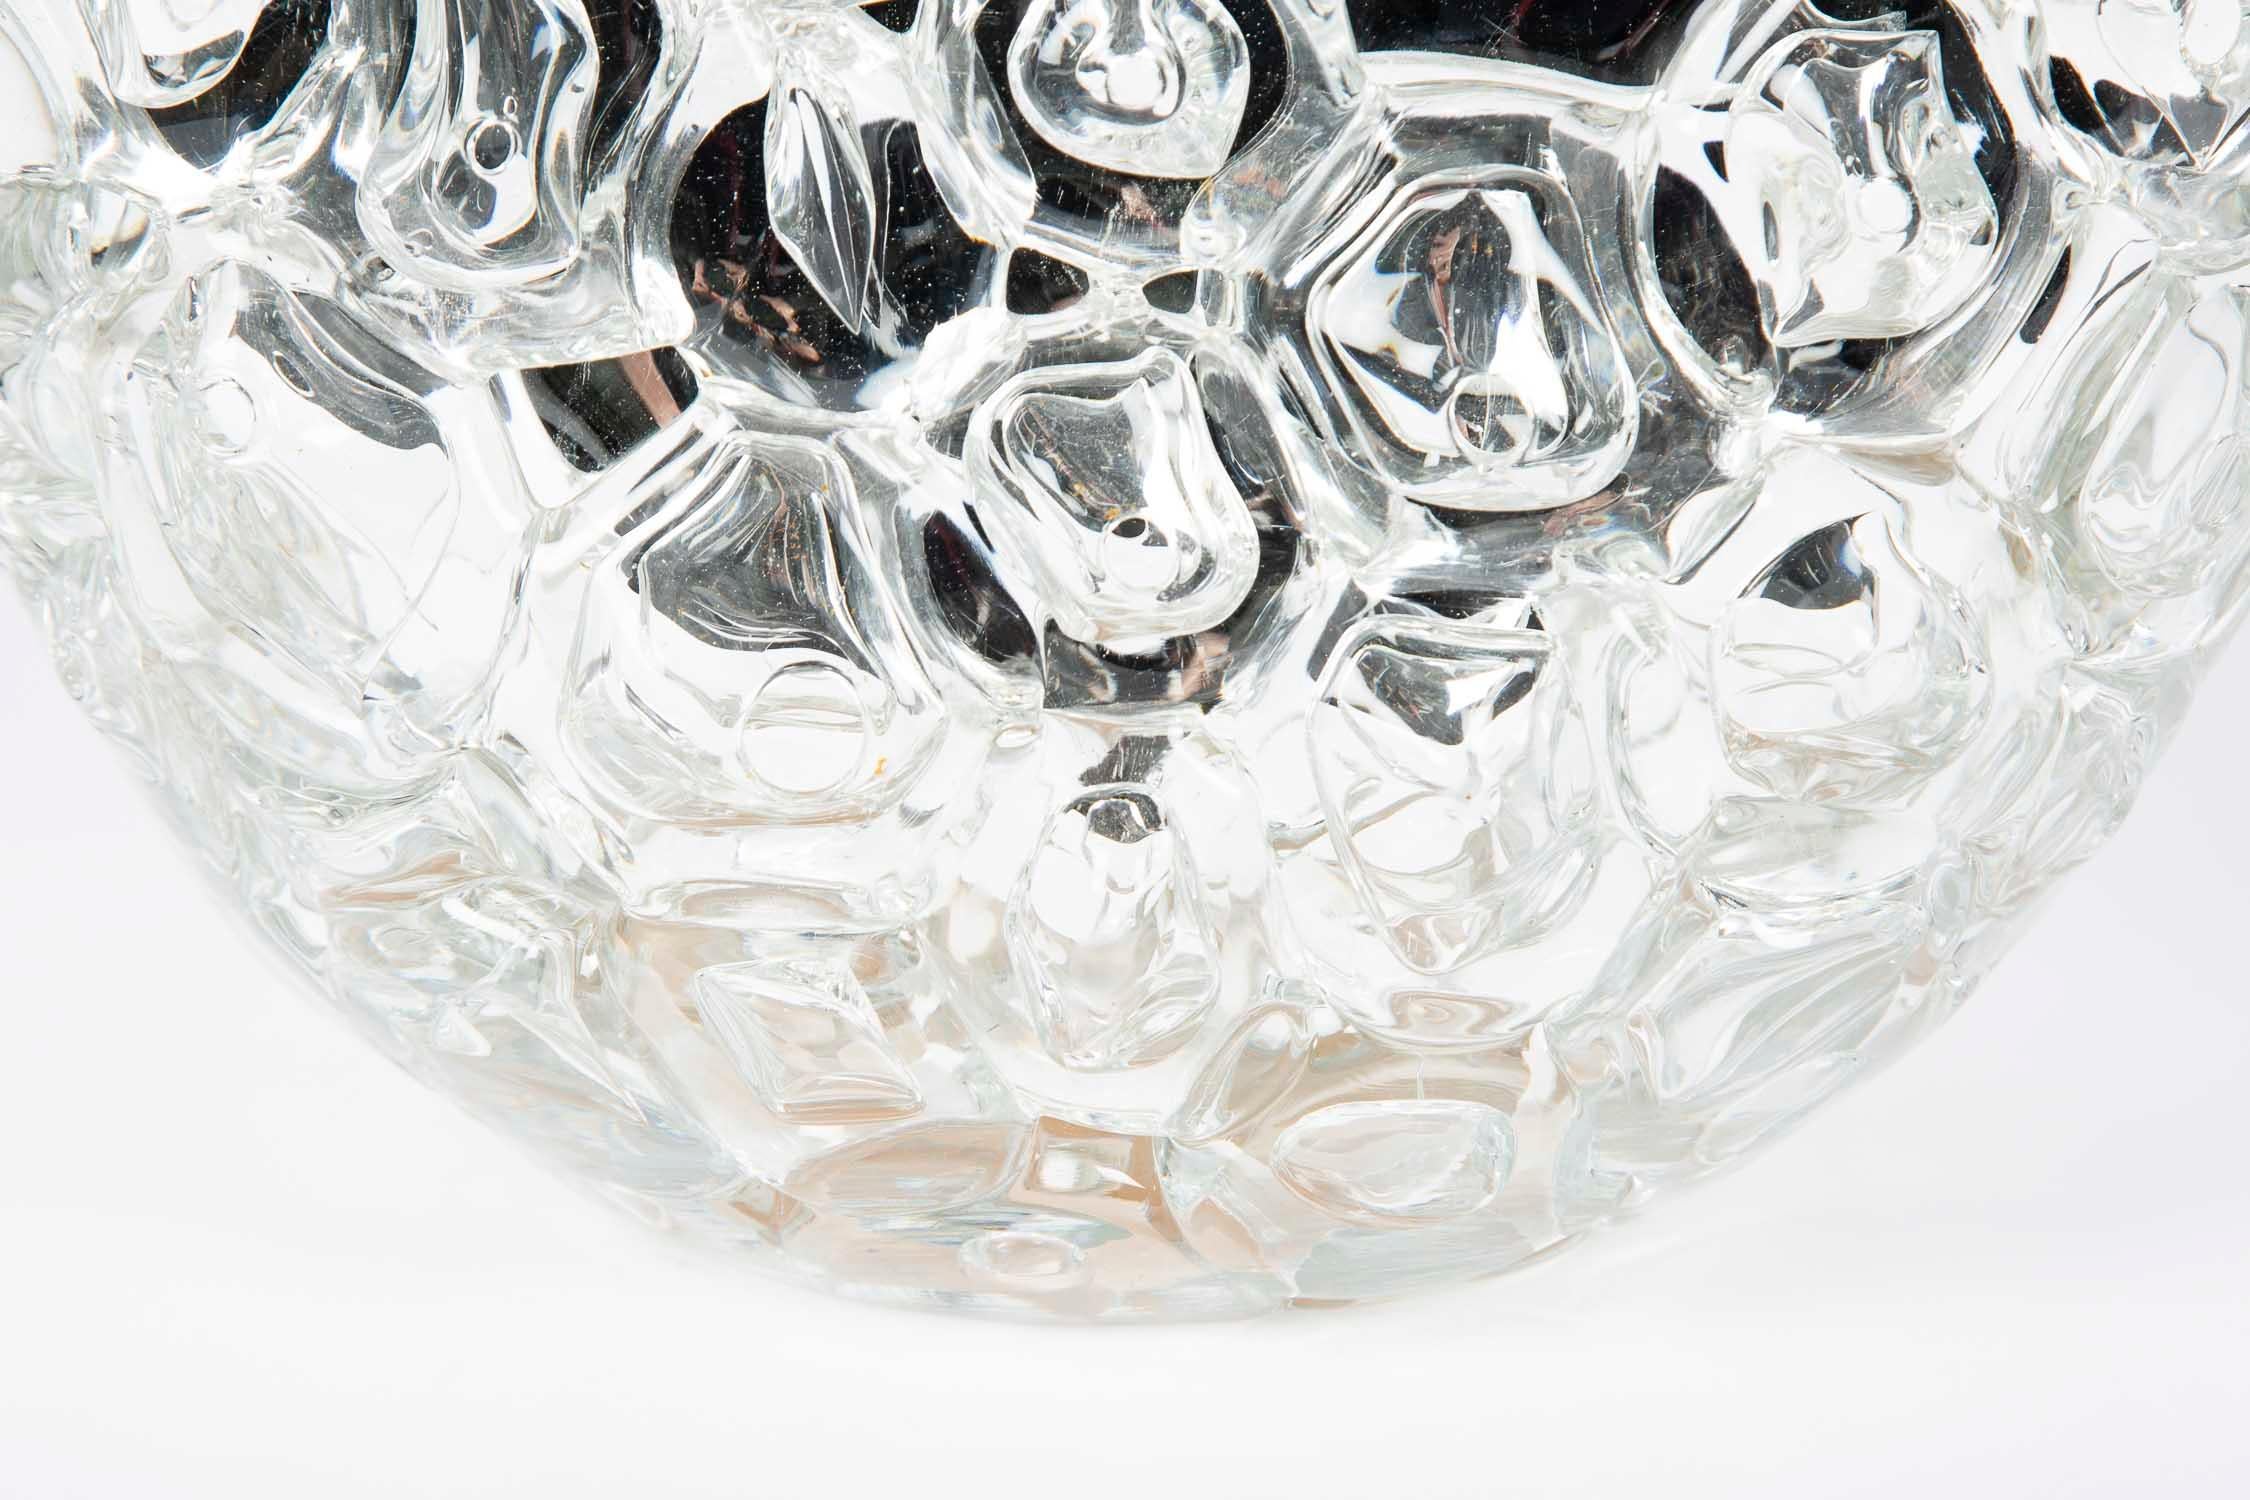 British Bubblewrap in Clear, a Unique silver & clear glass Vase by Allister Malcolm